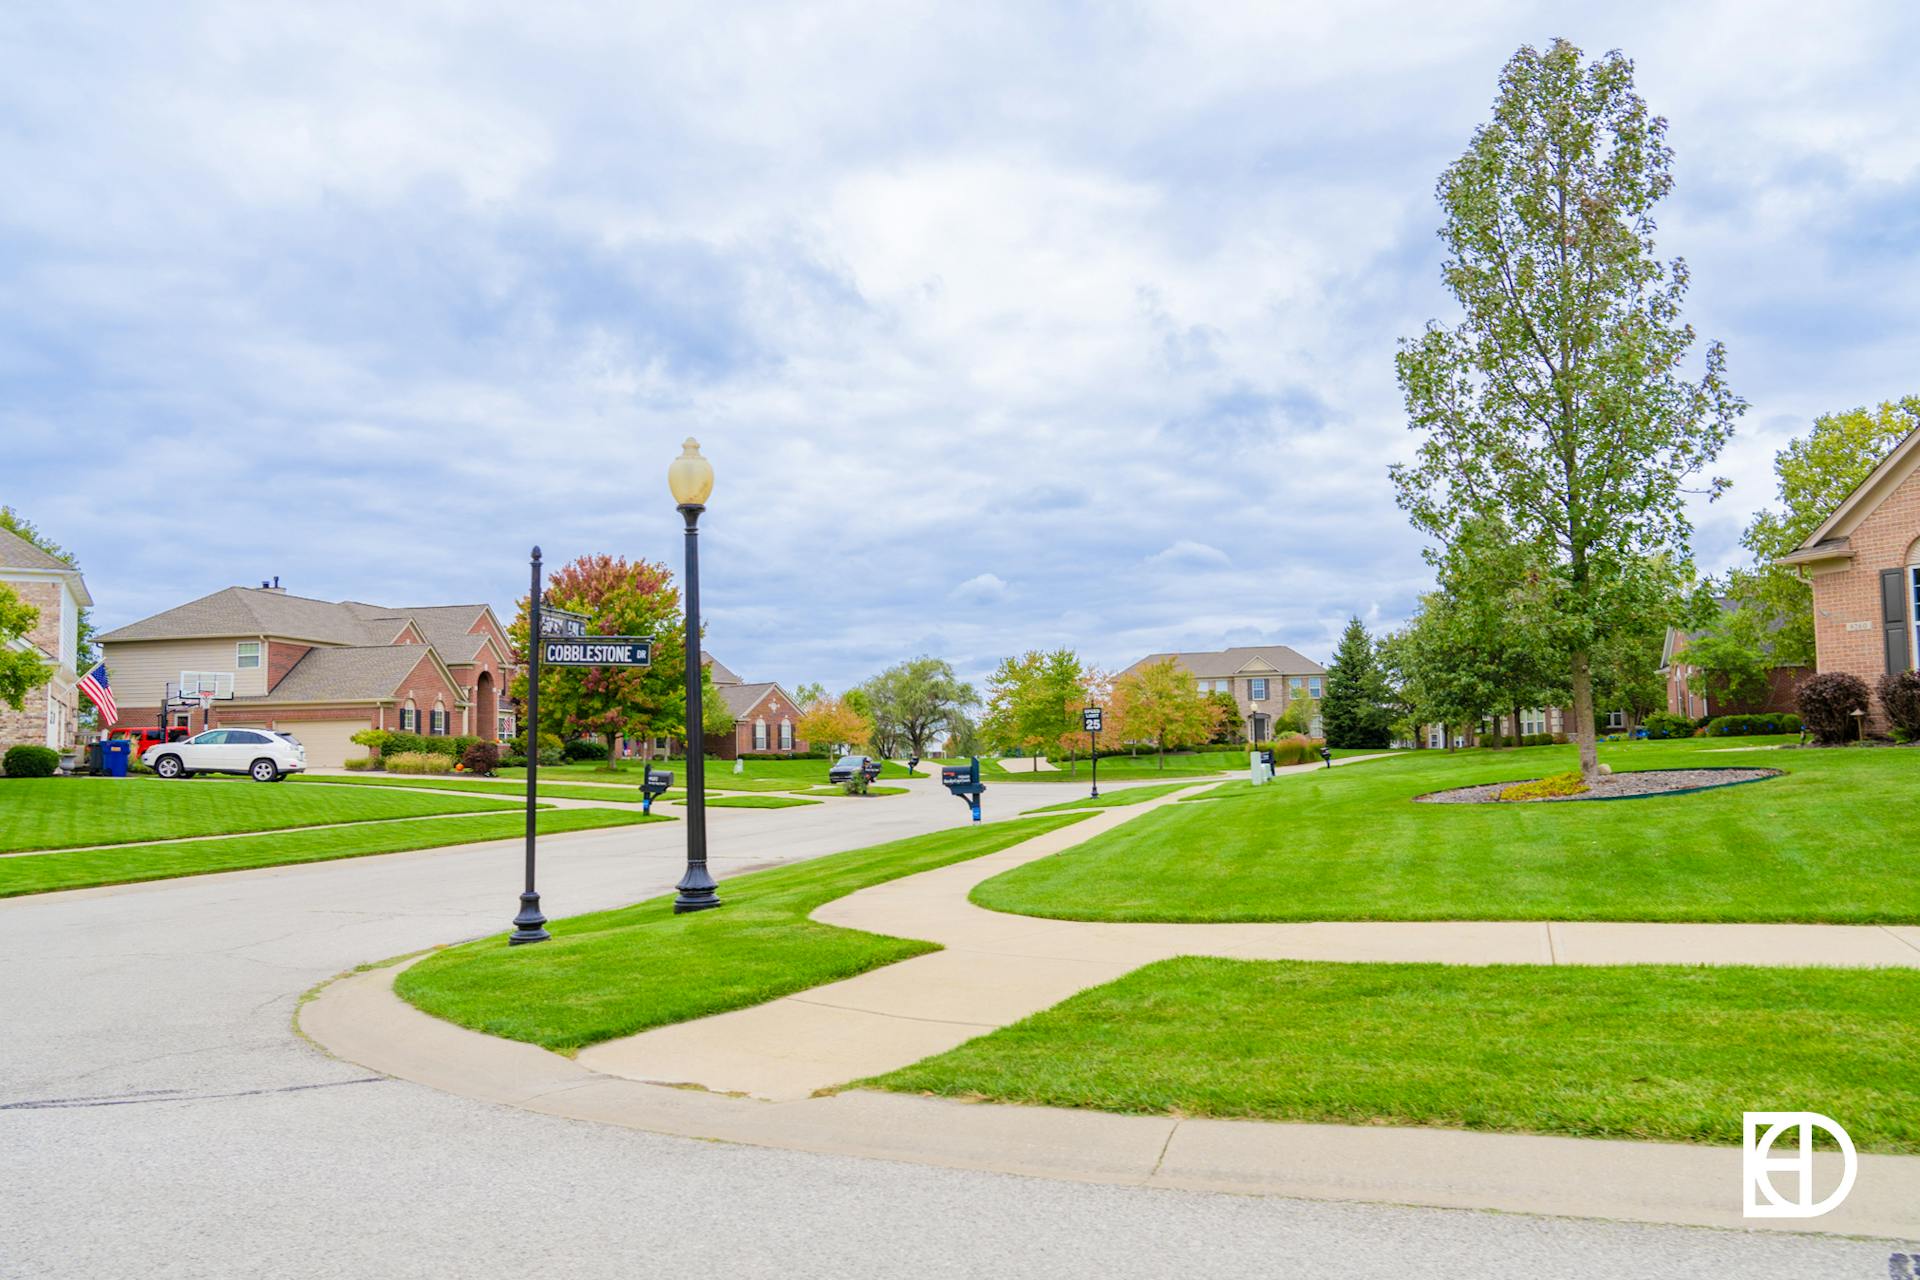 Photo of street view of Cobblestone Lakes in Zionsville, Indiana.